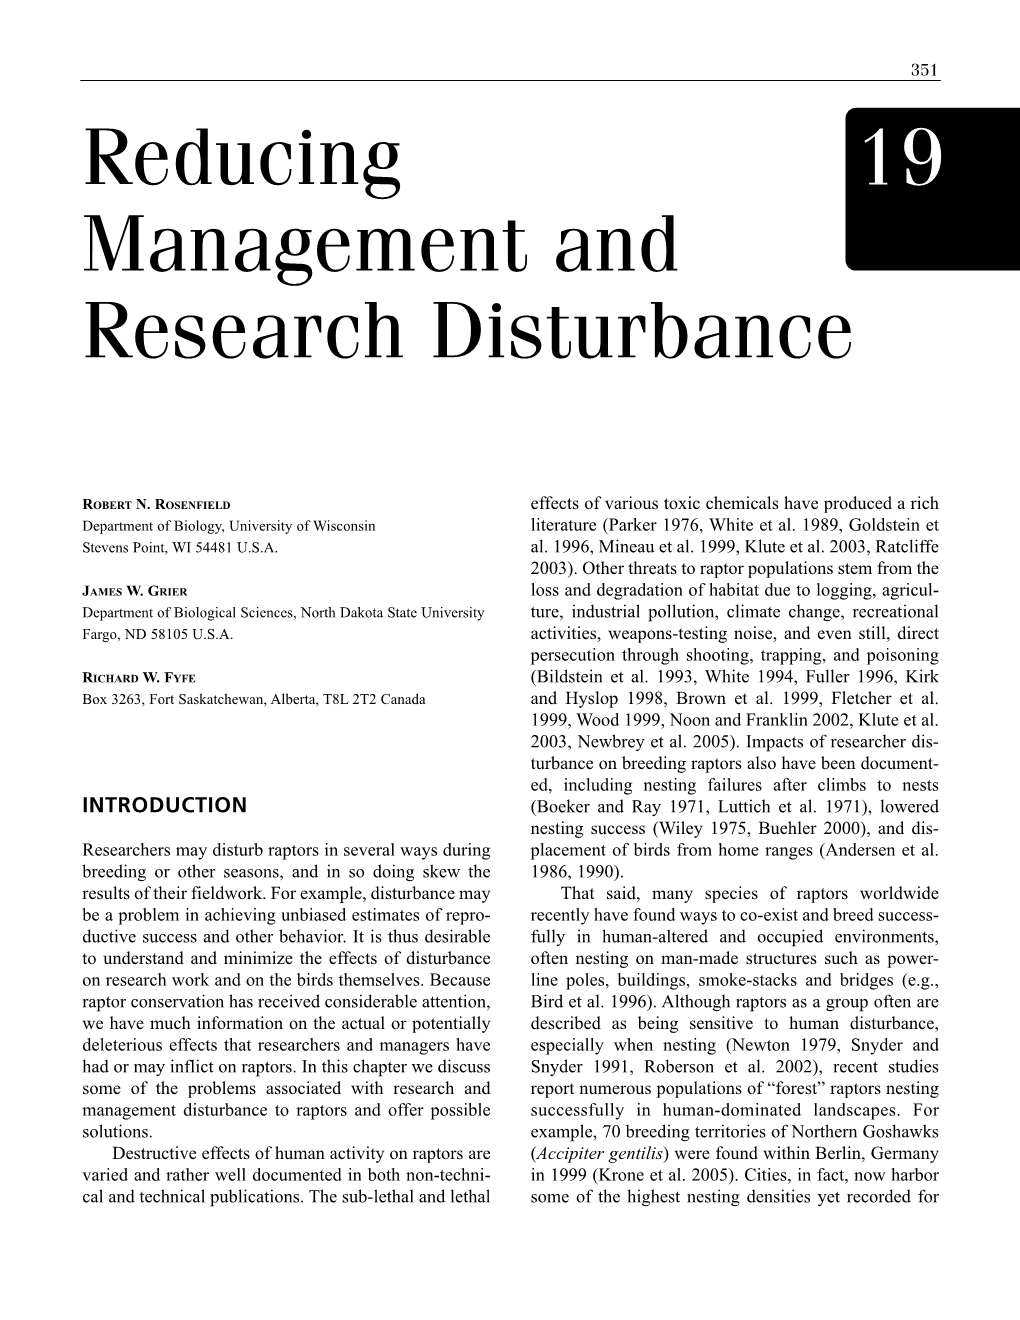 Reducing Management and Research Disturbance 19